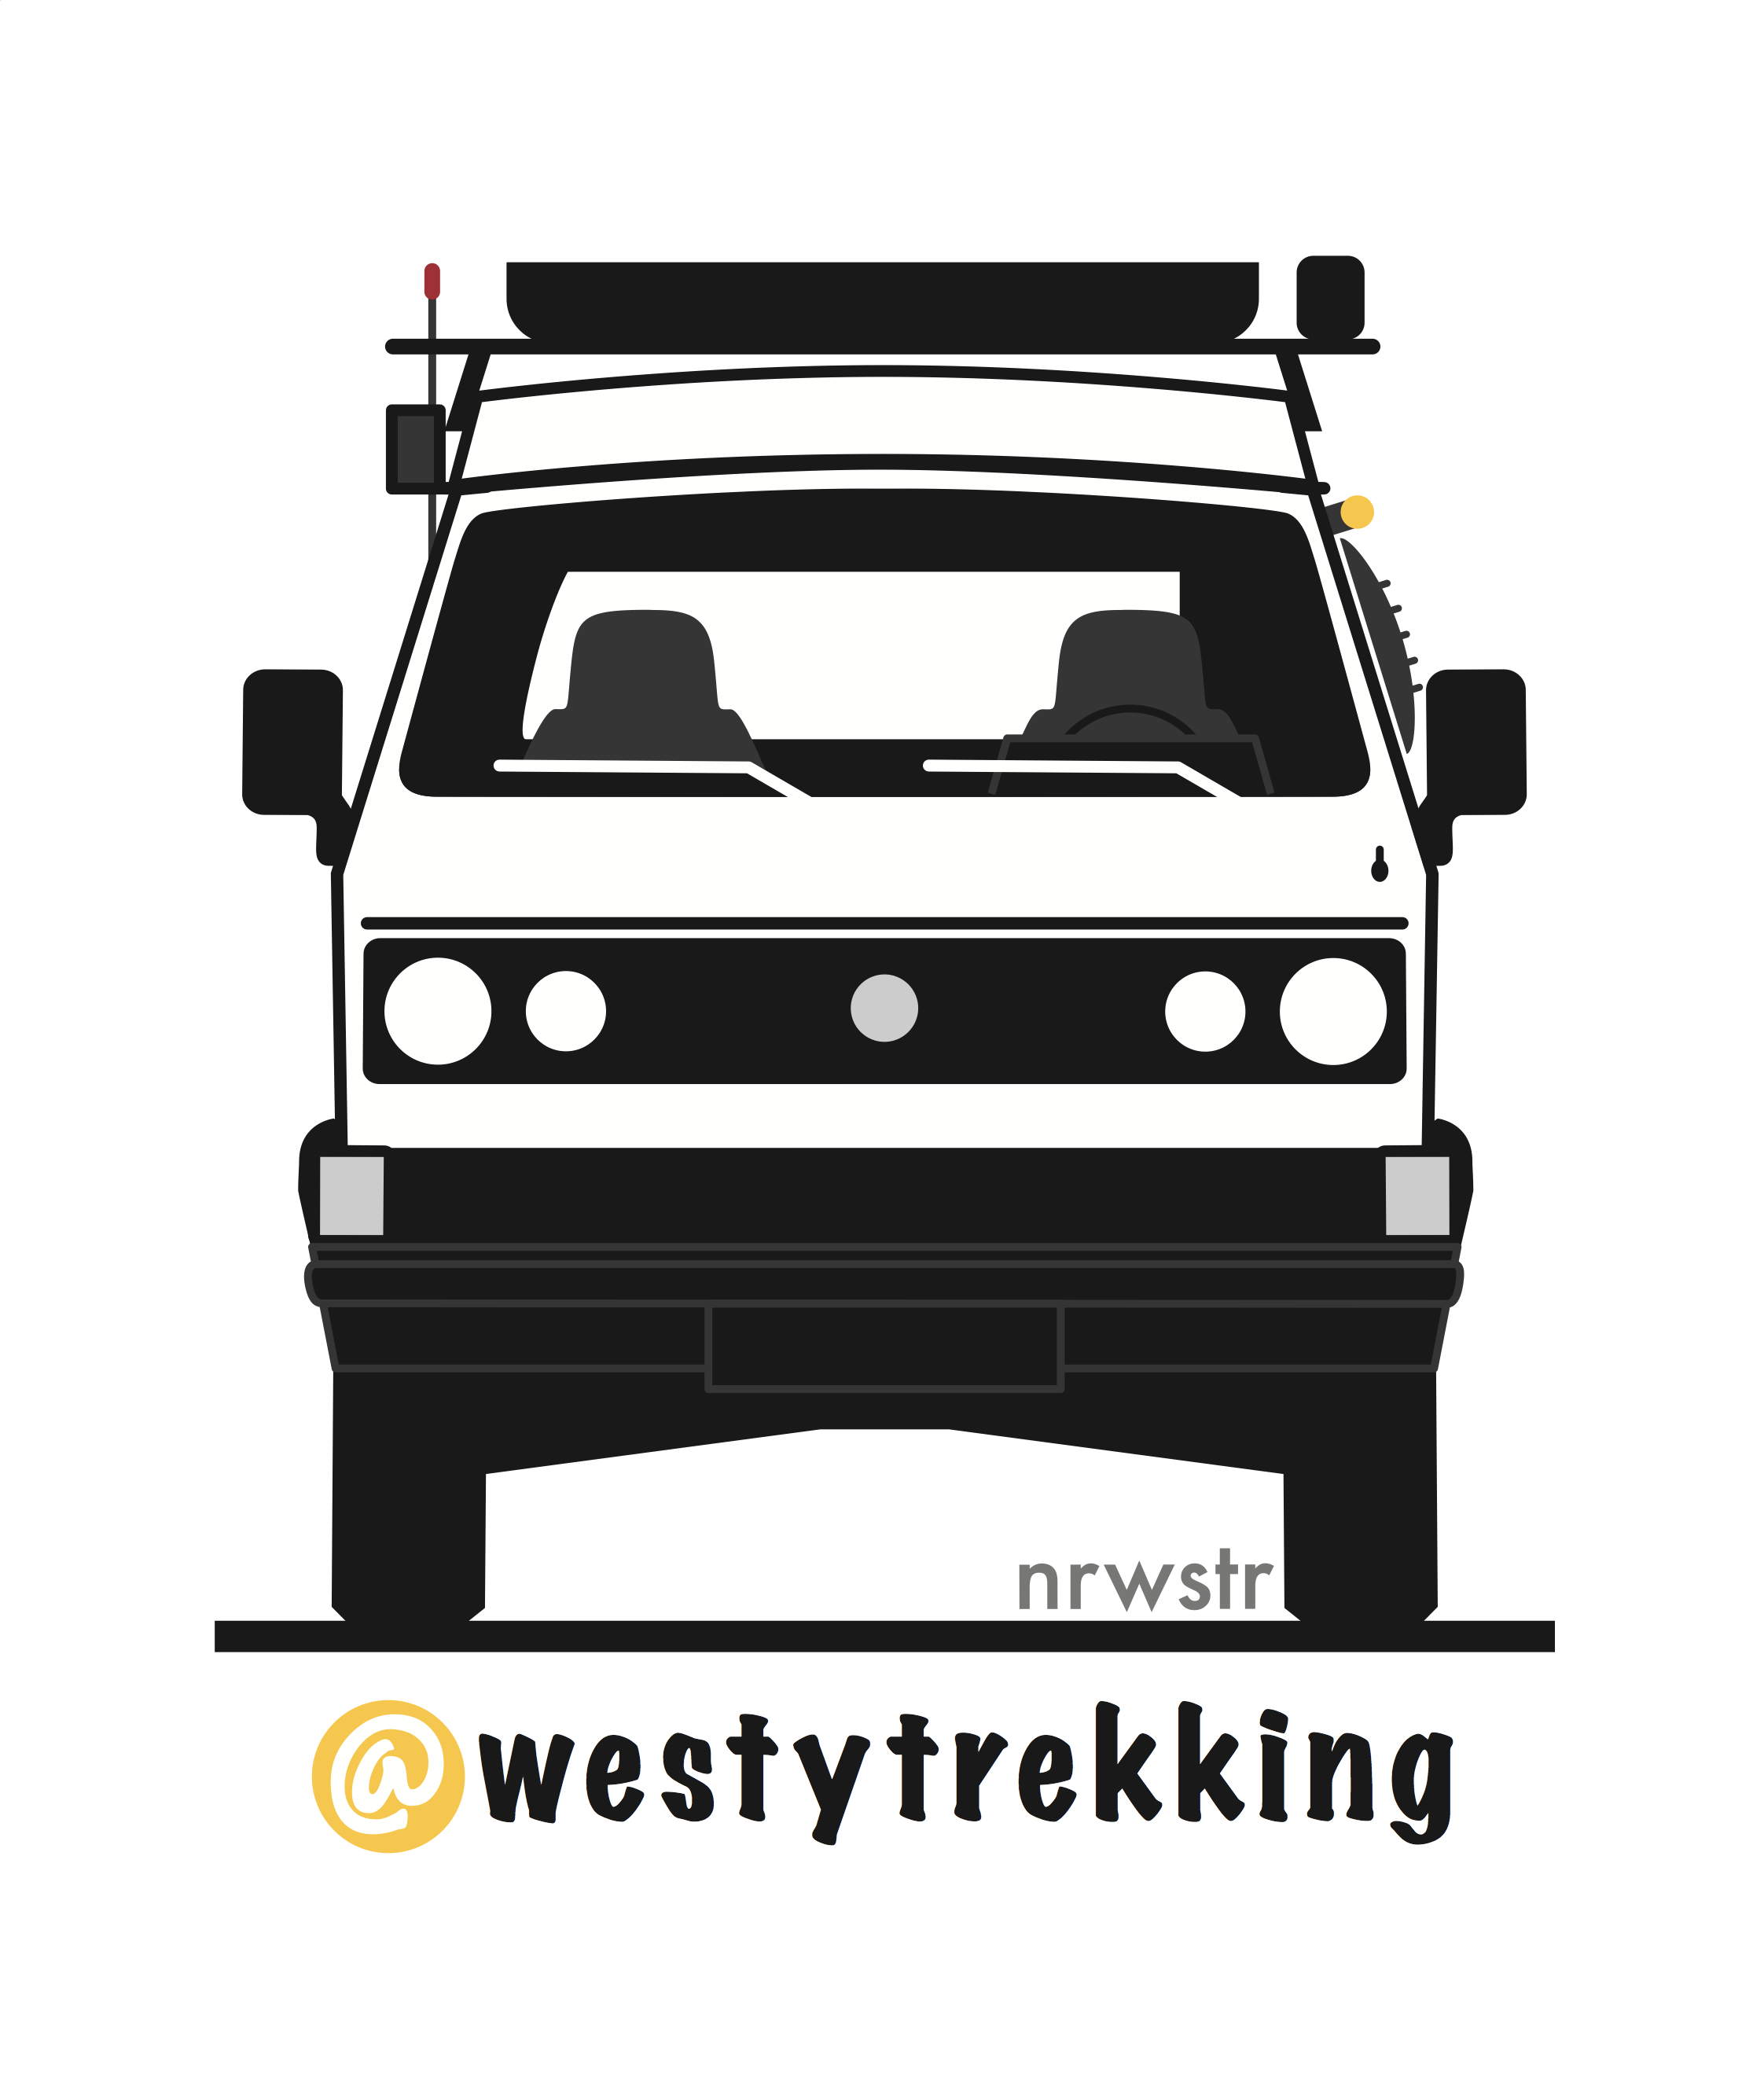 westytrekking front view.png